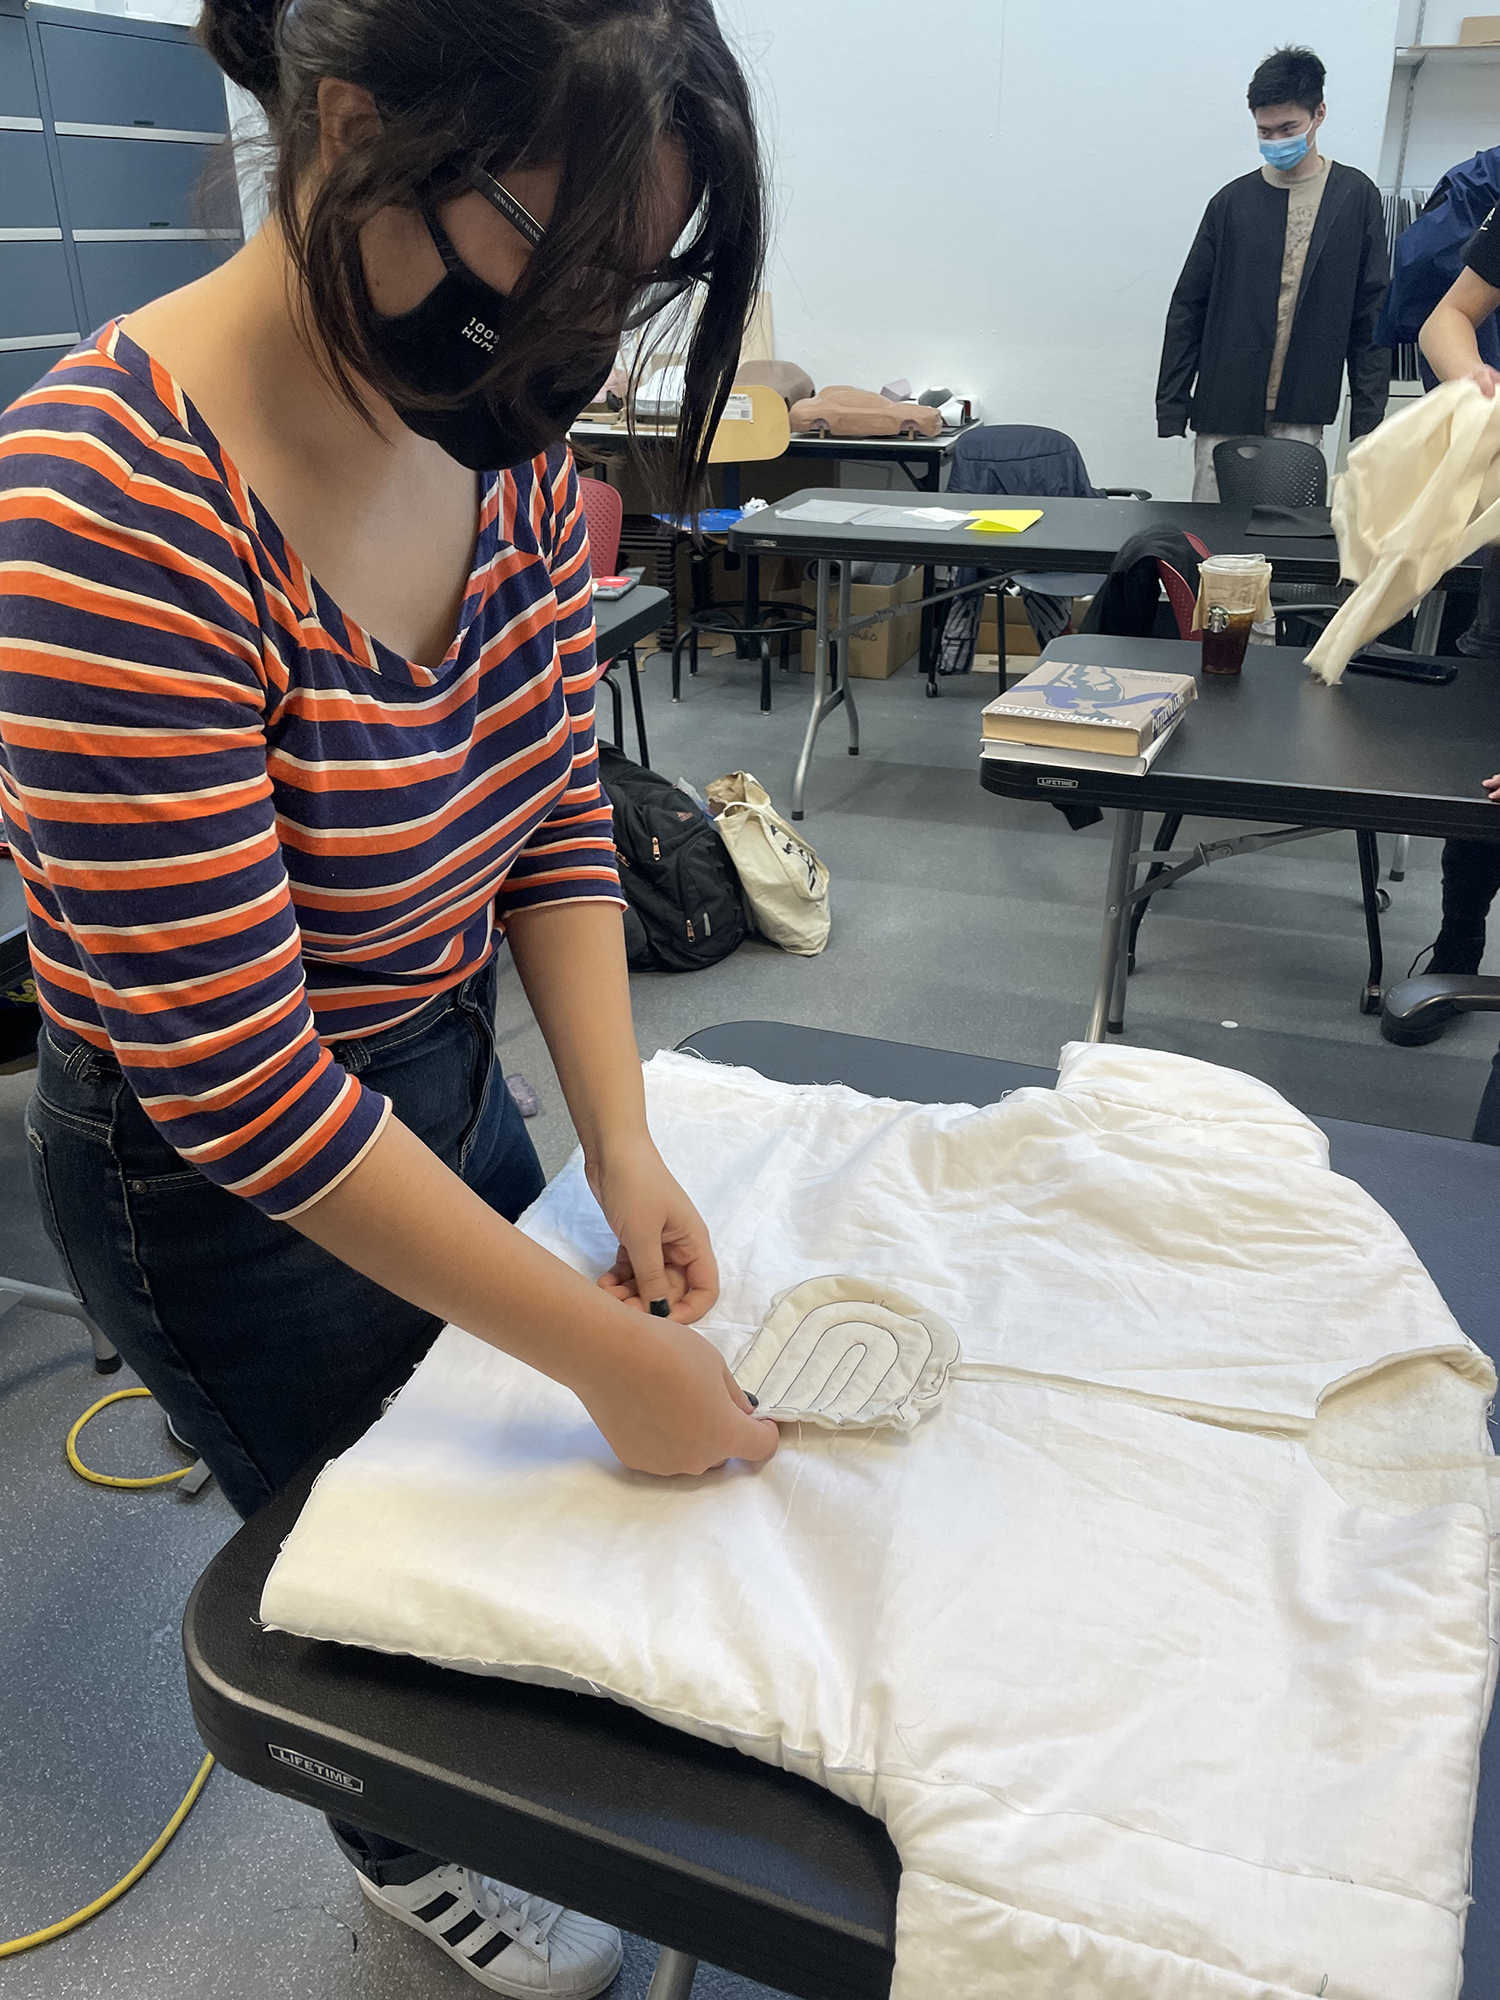 A student works with a white fabric.